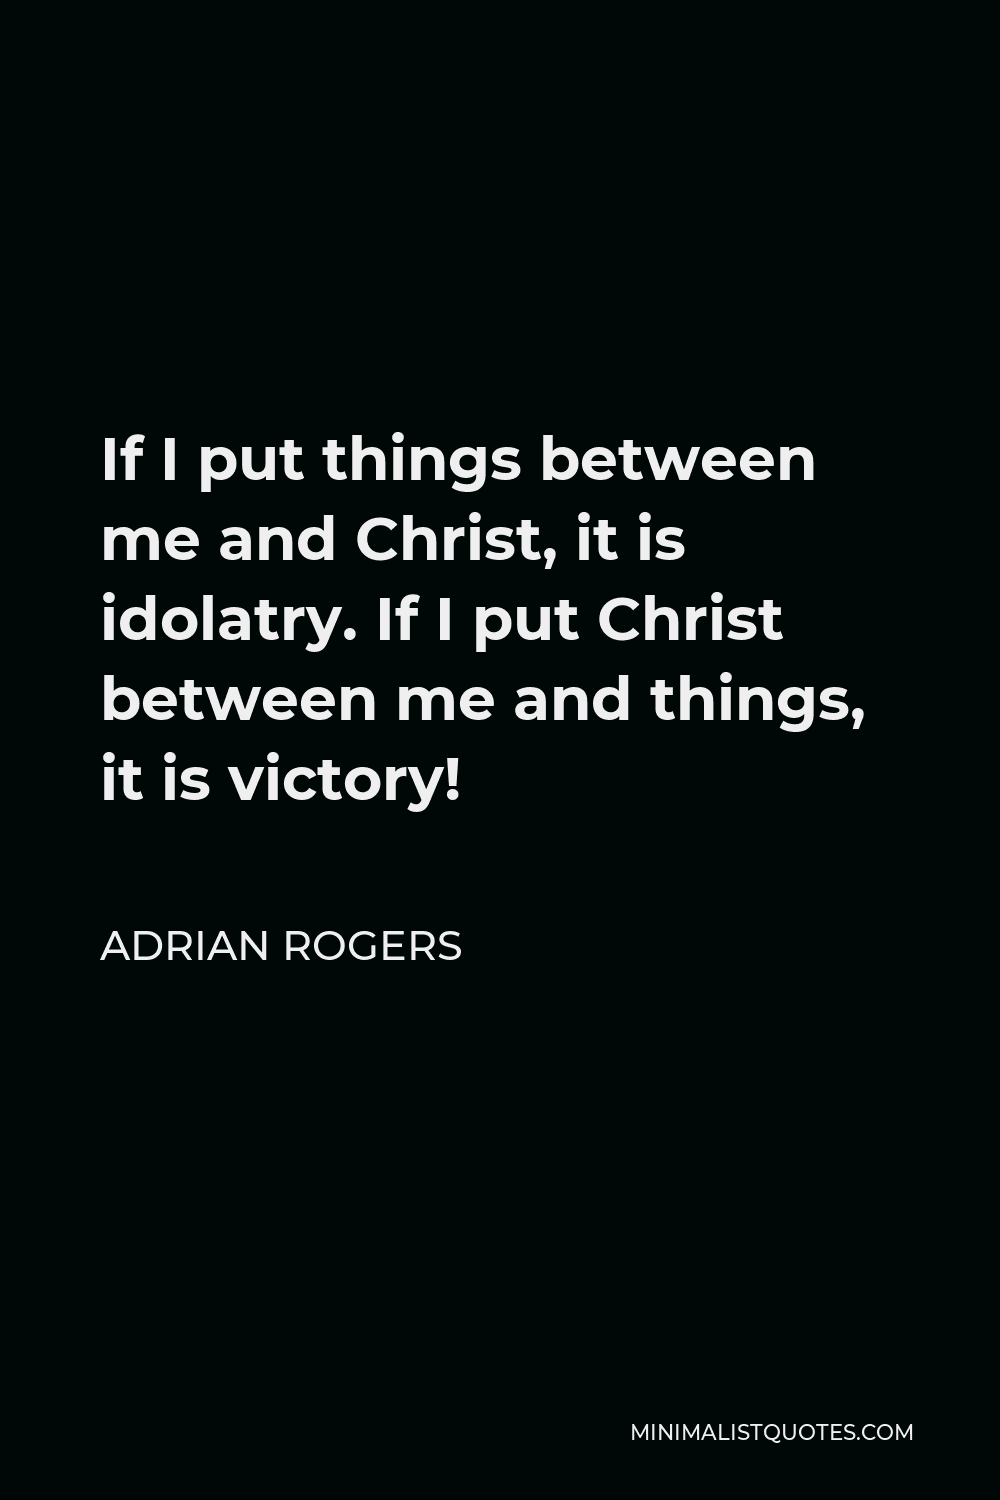 Adrian Rogers Quote - If I put things between me and Christ, it is idolatry. If I put Christ between me and things, it is victory!